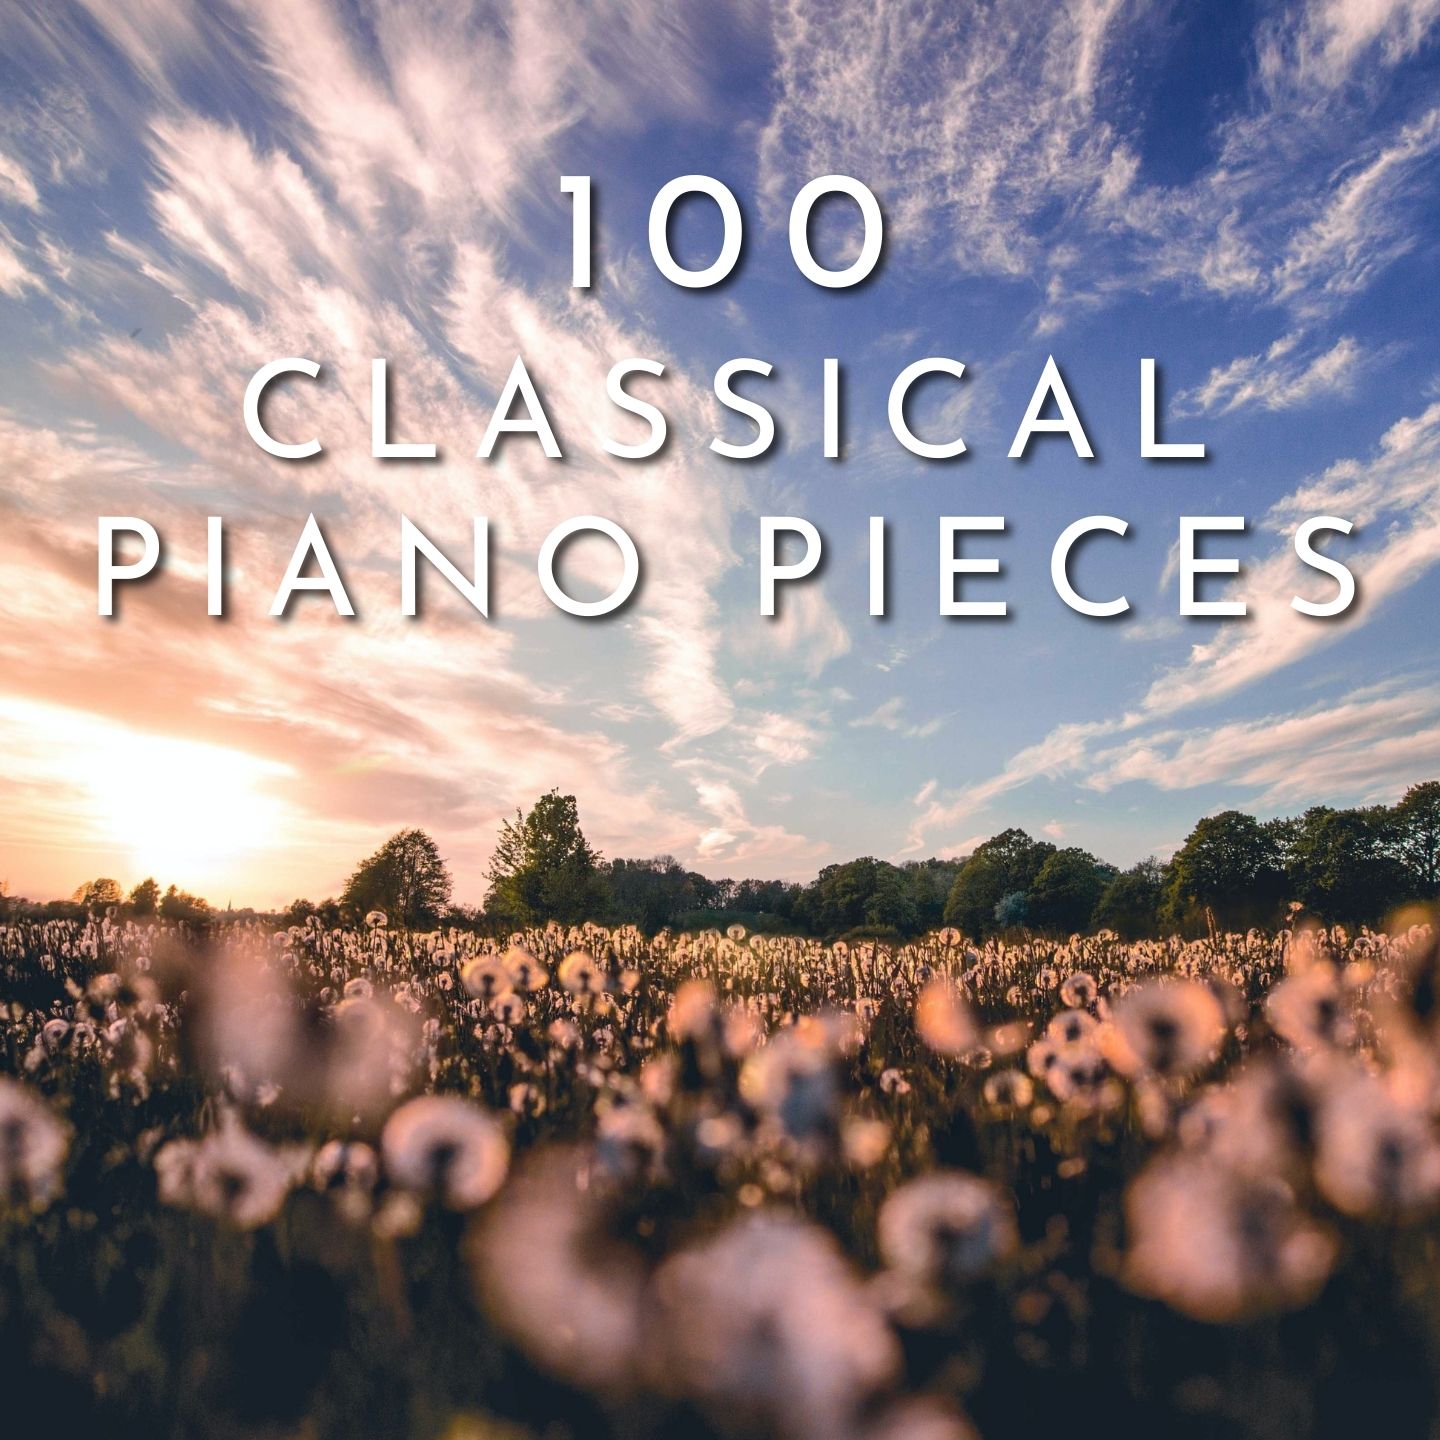 100 Classical Piano Pieces